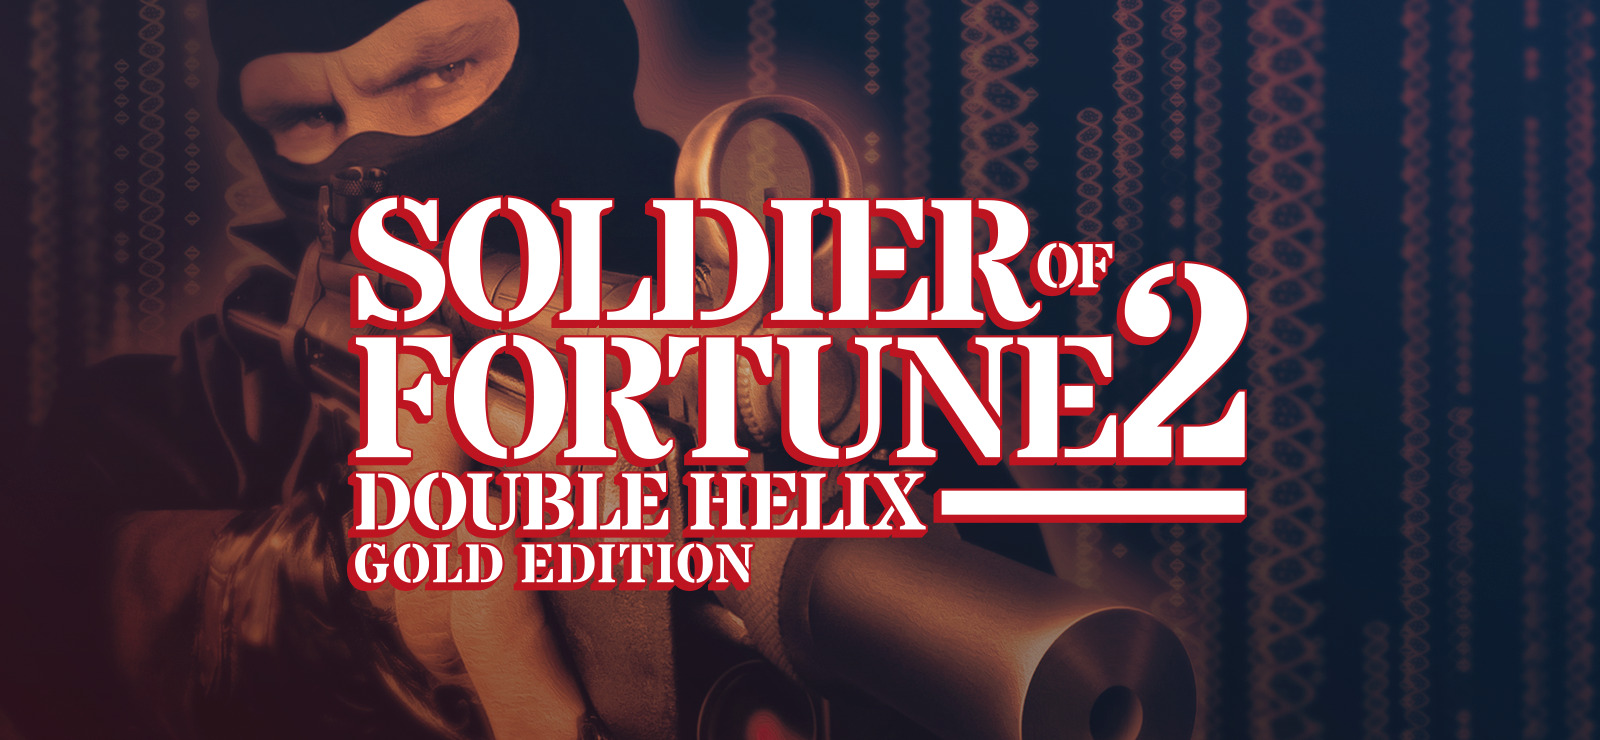 Download Soldier of Fortune 2 Double Helix Gold Edition v1.03.Hotfix-GOG